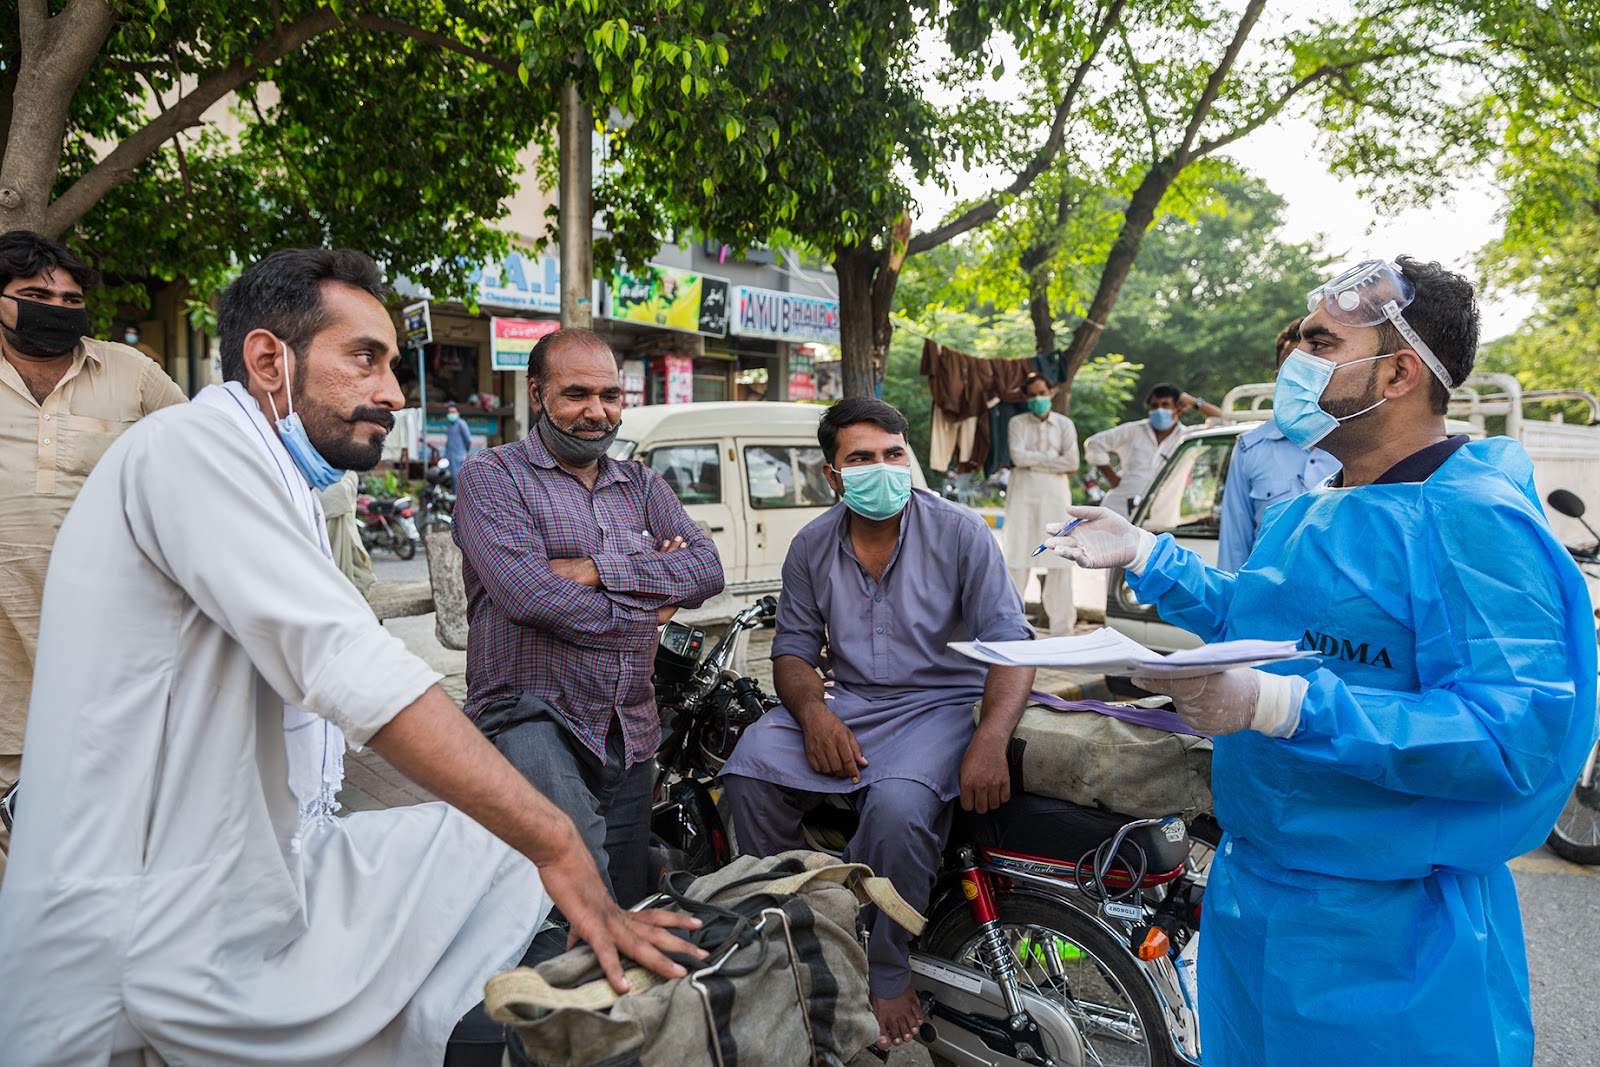 Dr Muhammad Asif is stood on the street interviewing four wage workers sat on and around their motorcycles.  